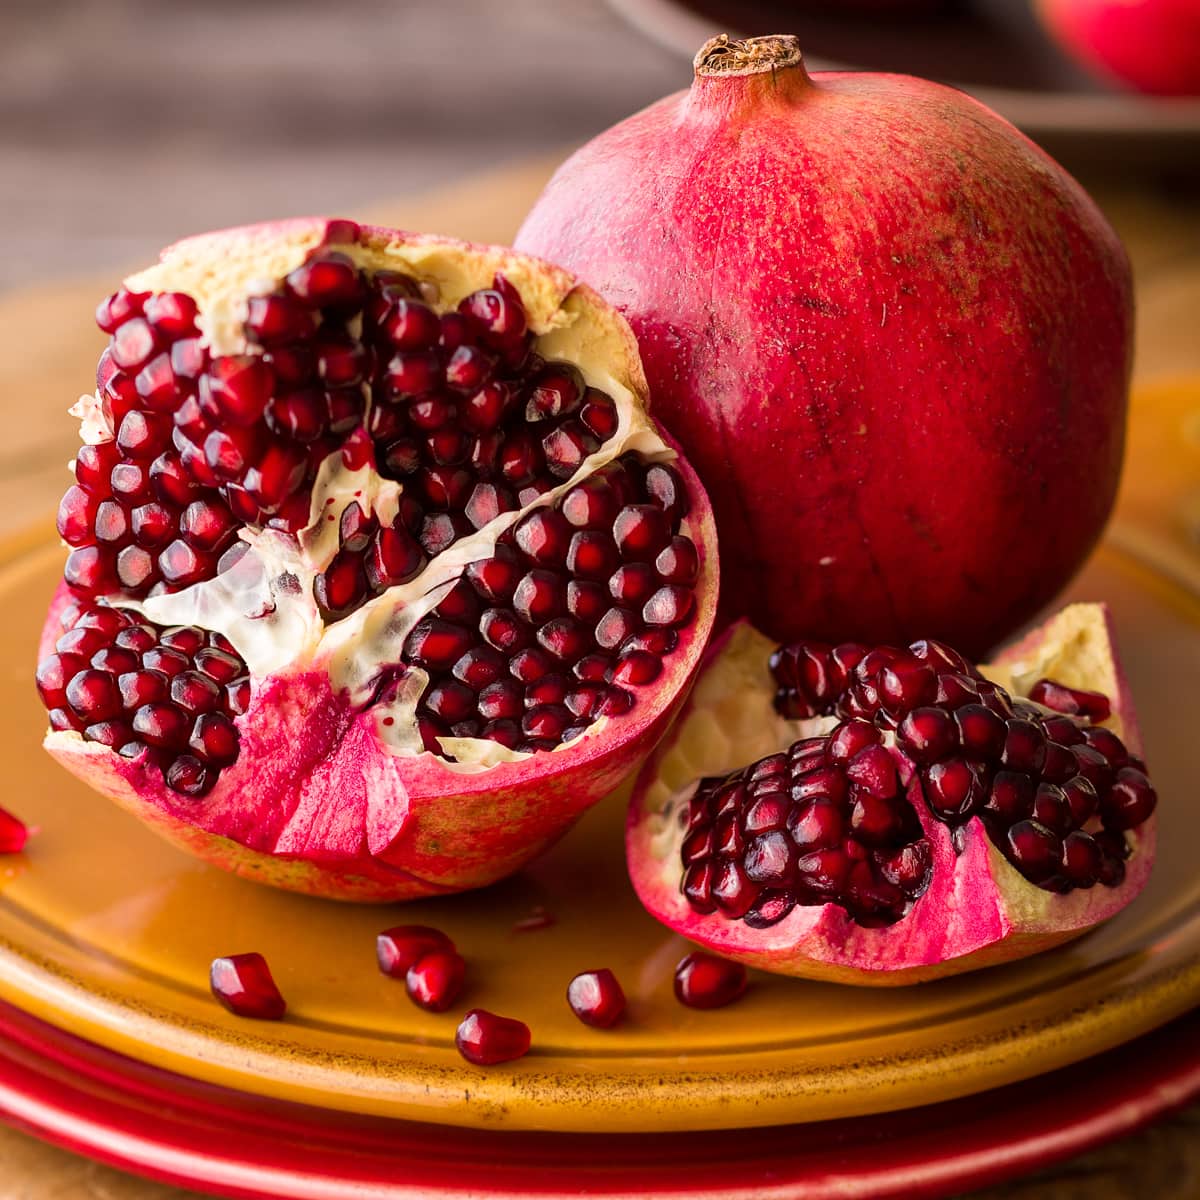 20 Things to do With Pomegranate Seeds - A Foodcentric Life